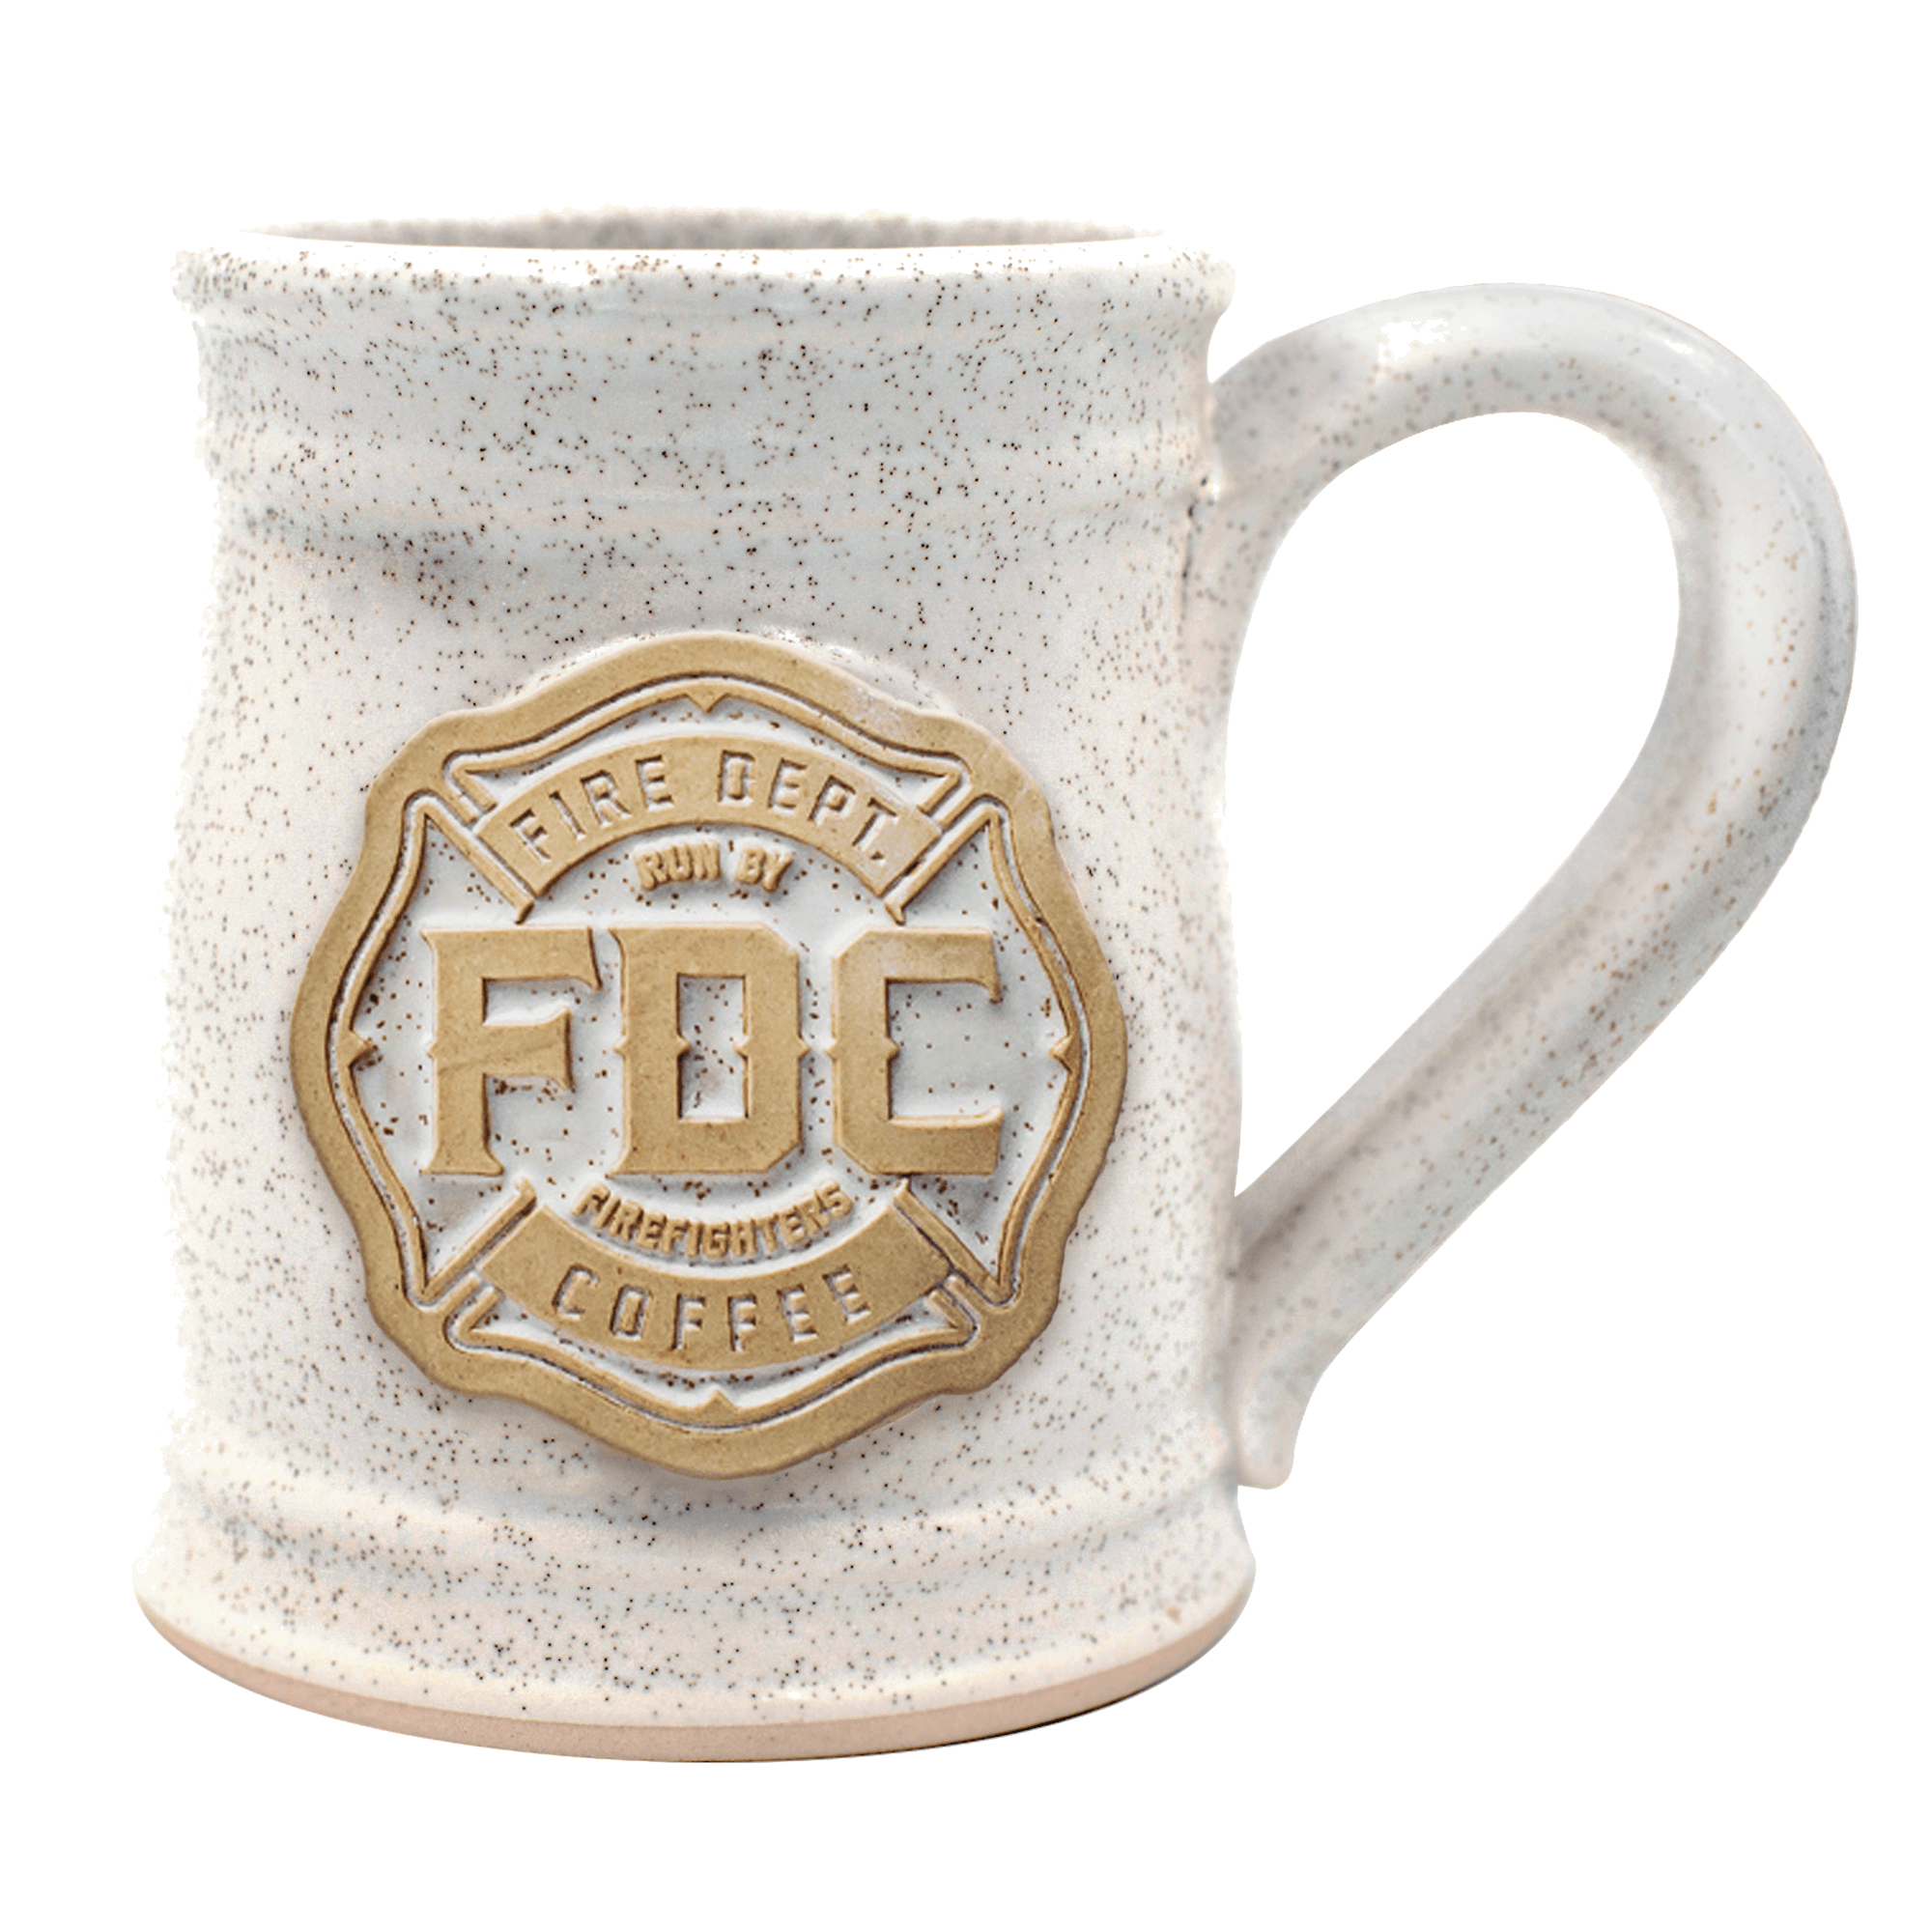 A white mug with black speckles and Fire Department Coffee's maltese cross logo painted in gold.